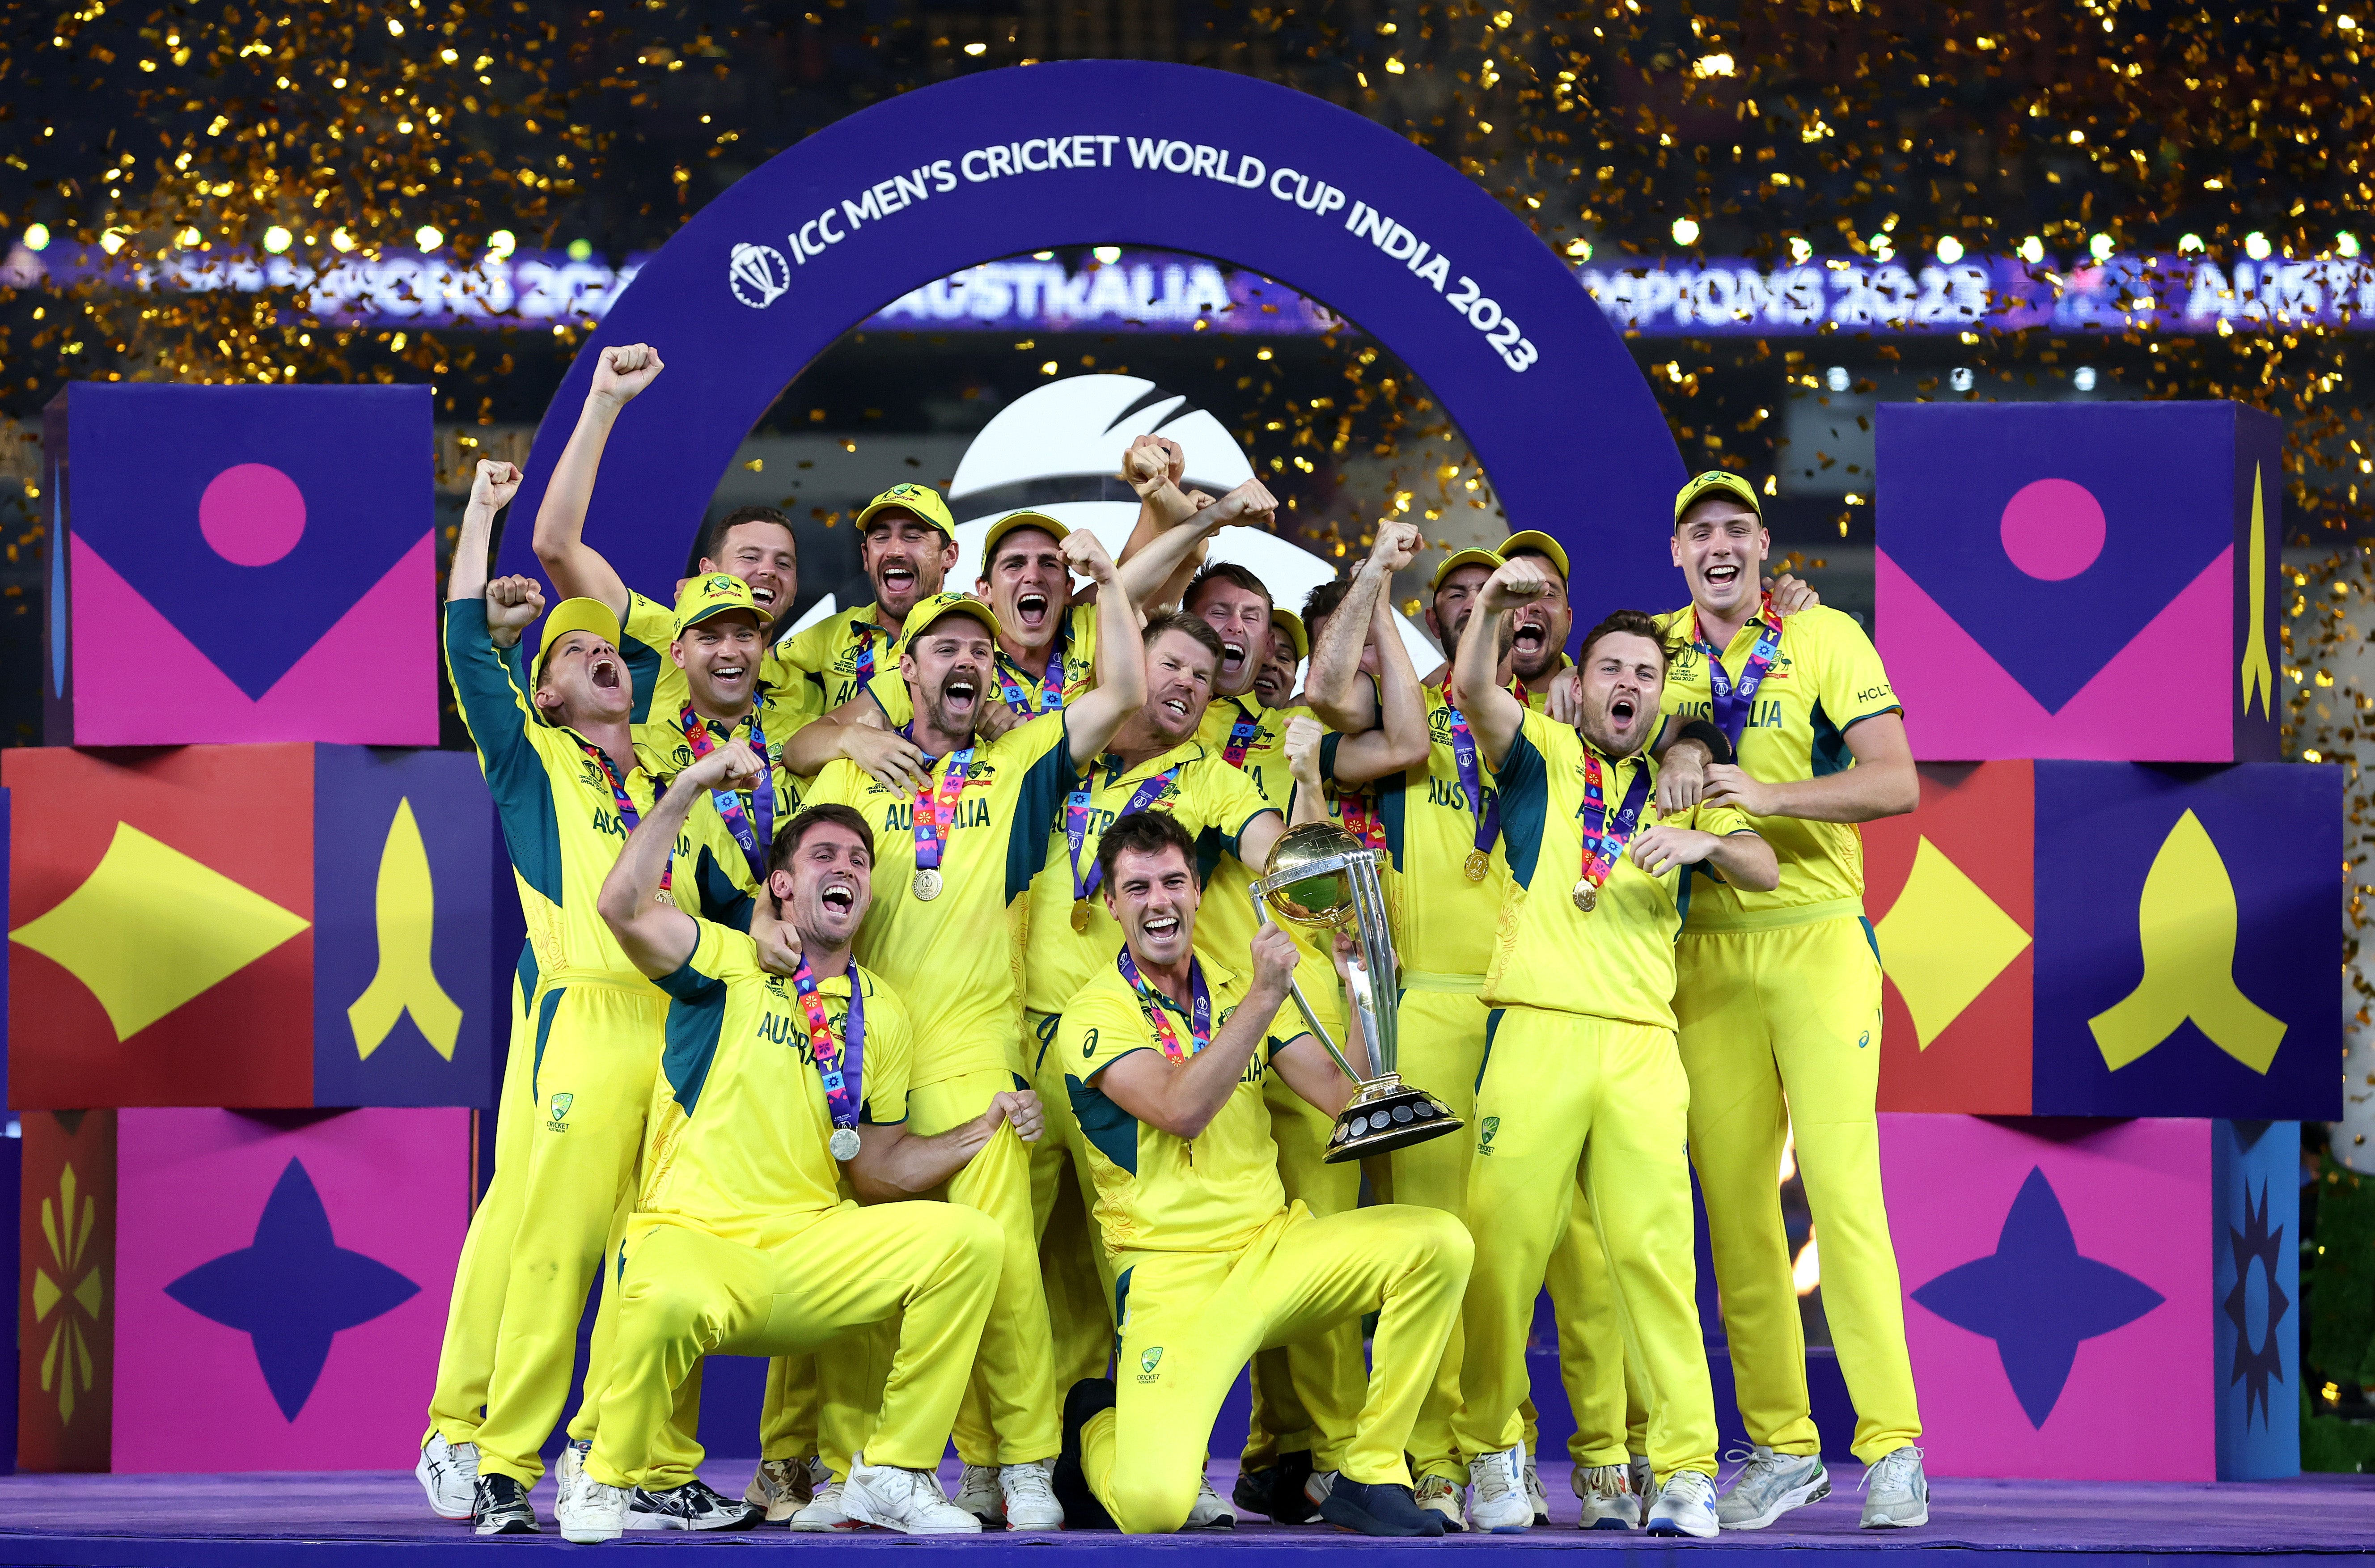 Australia have now won the one day World Cup a record extending six times